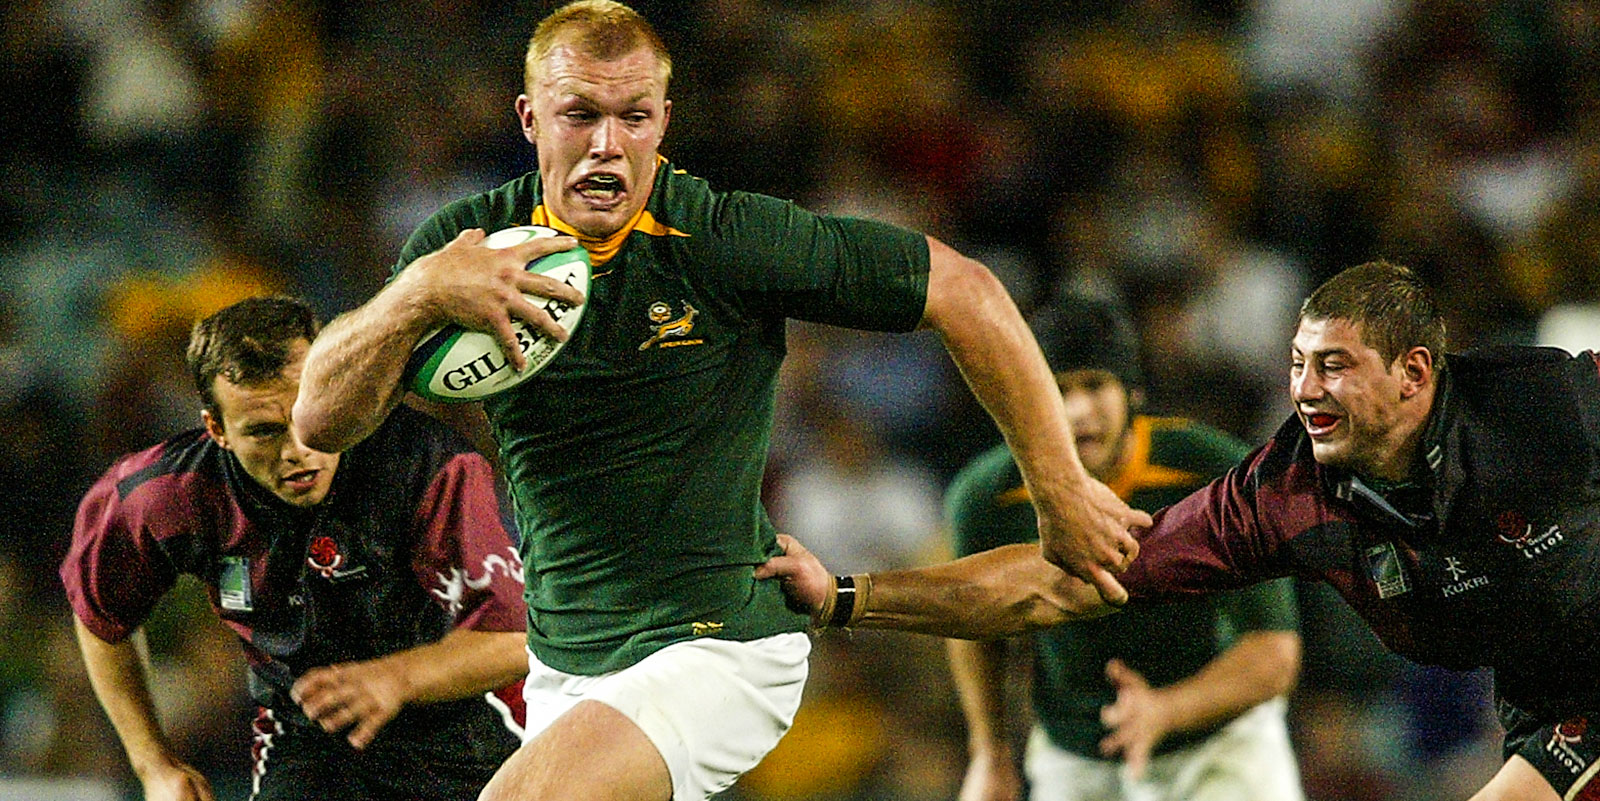 Schalk Burger made his Test debut against Georgia at the RWC in 2003.